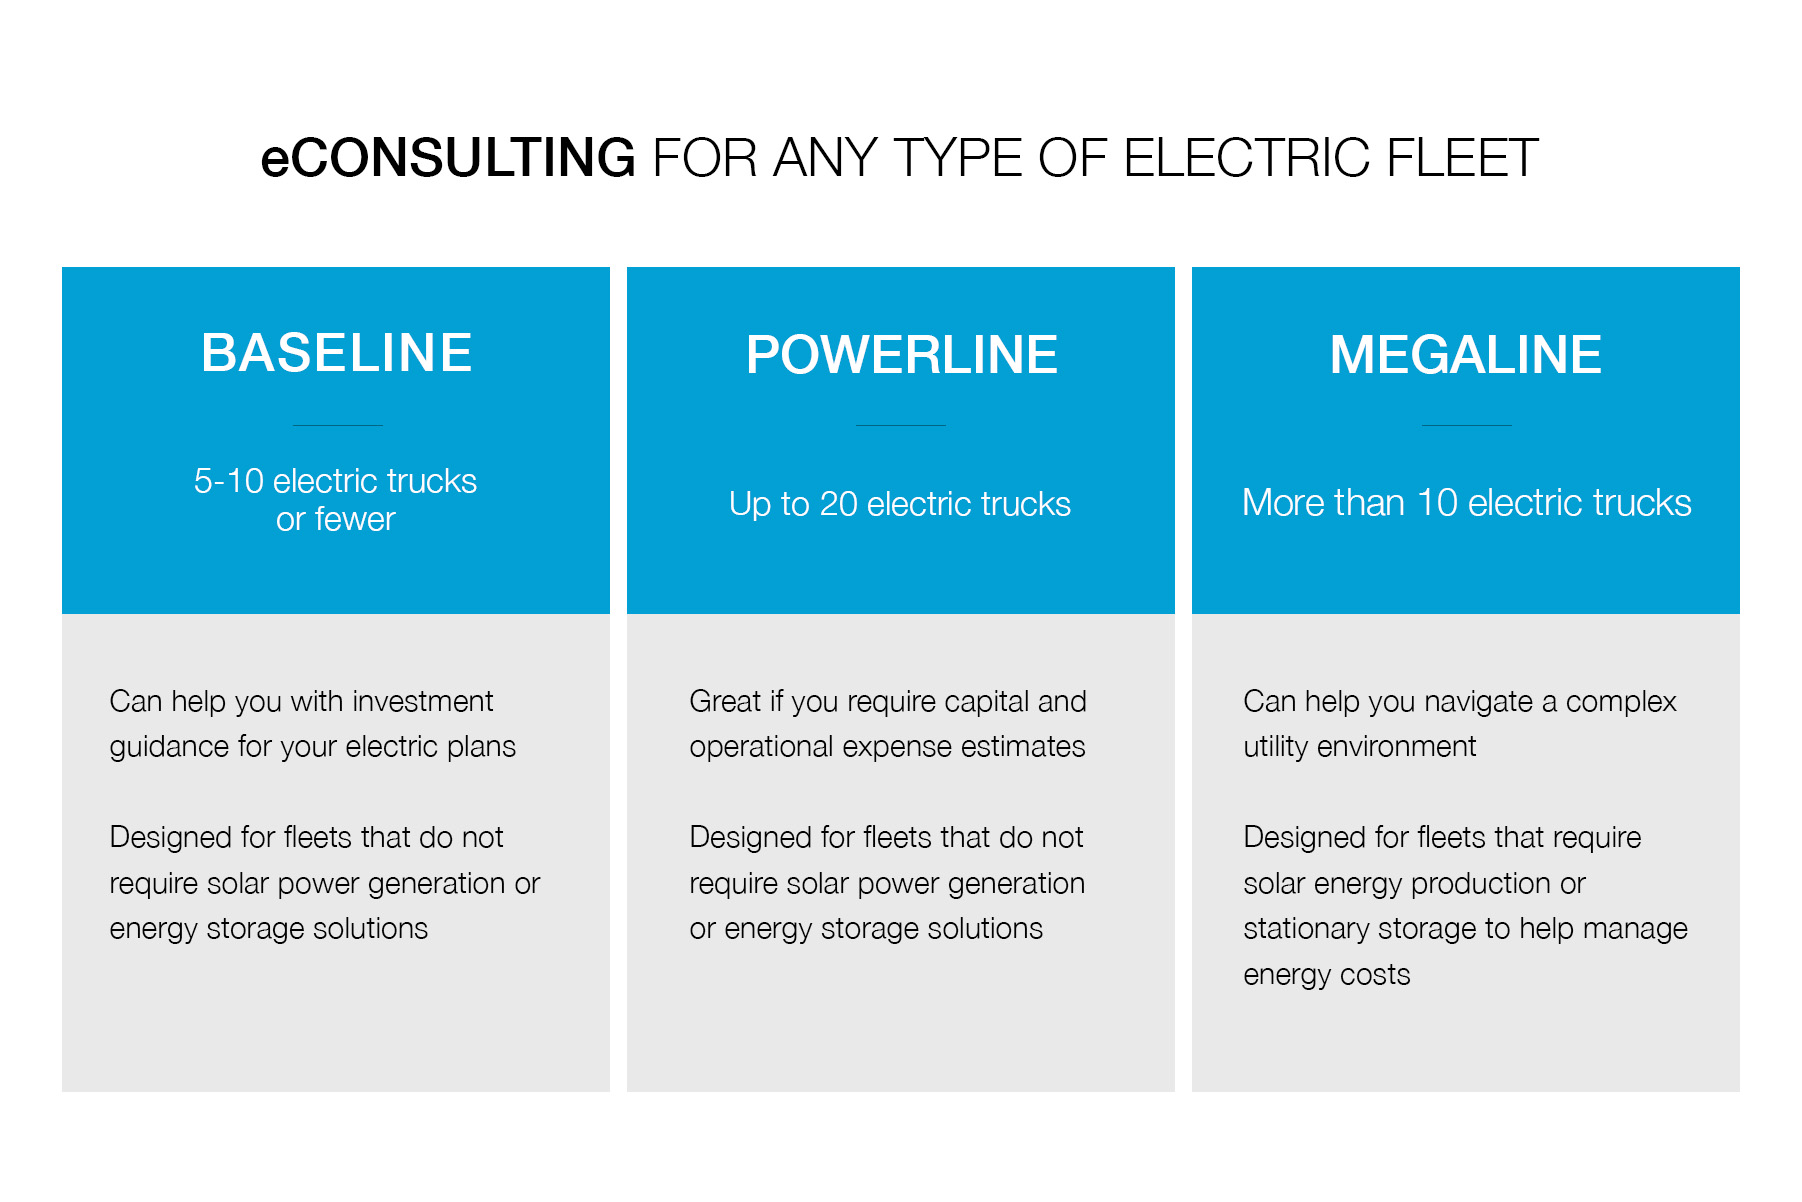 A chart that details the eConsulting solutions for any type of electric fleet. Baseline is good for 5-10 electric trucks and can help you with investment guidance for your electric plans. Powerline is good for up to 20 electric trucks and is great if you require capital and operational expense estimates. Megaline is good for more than 10 electric trucks and can help you navigate a complex utility environment.